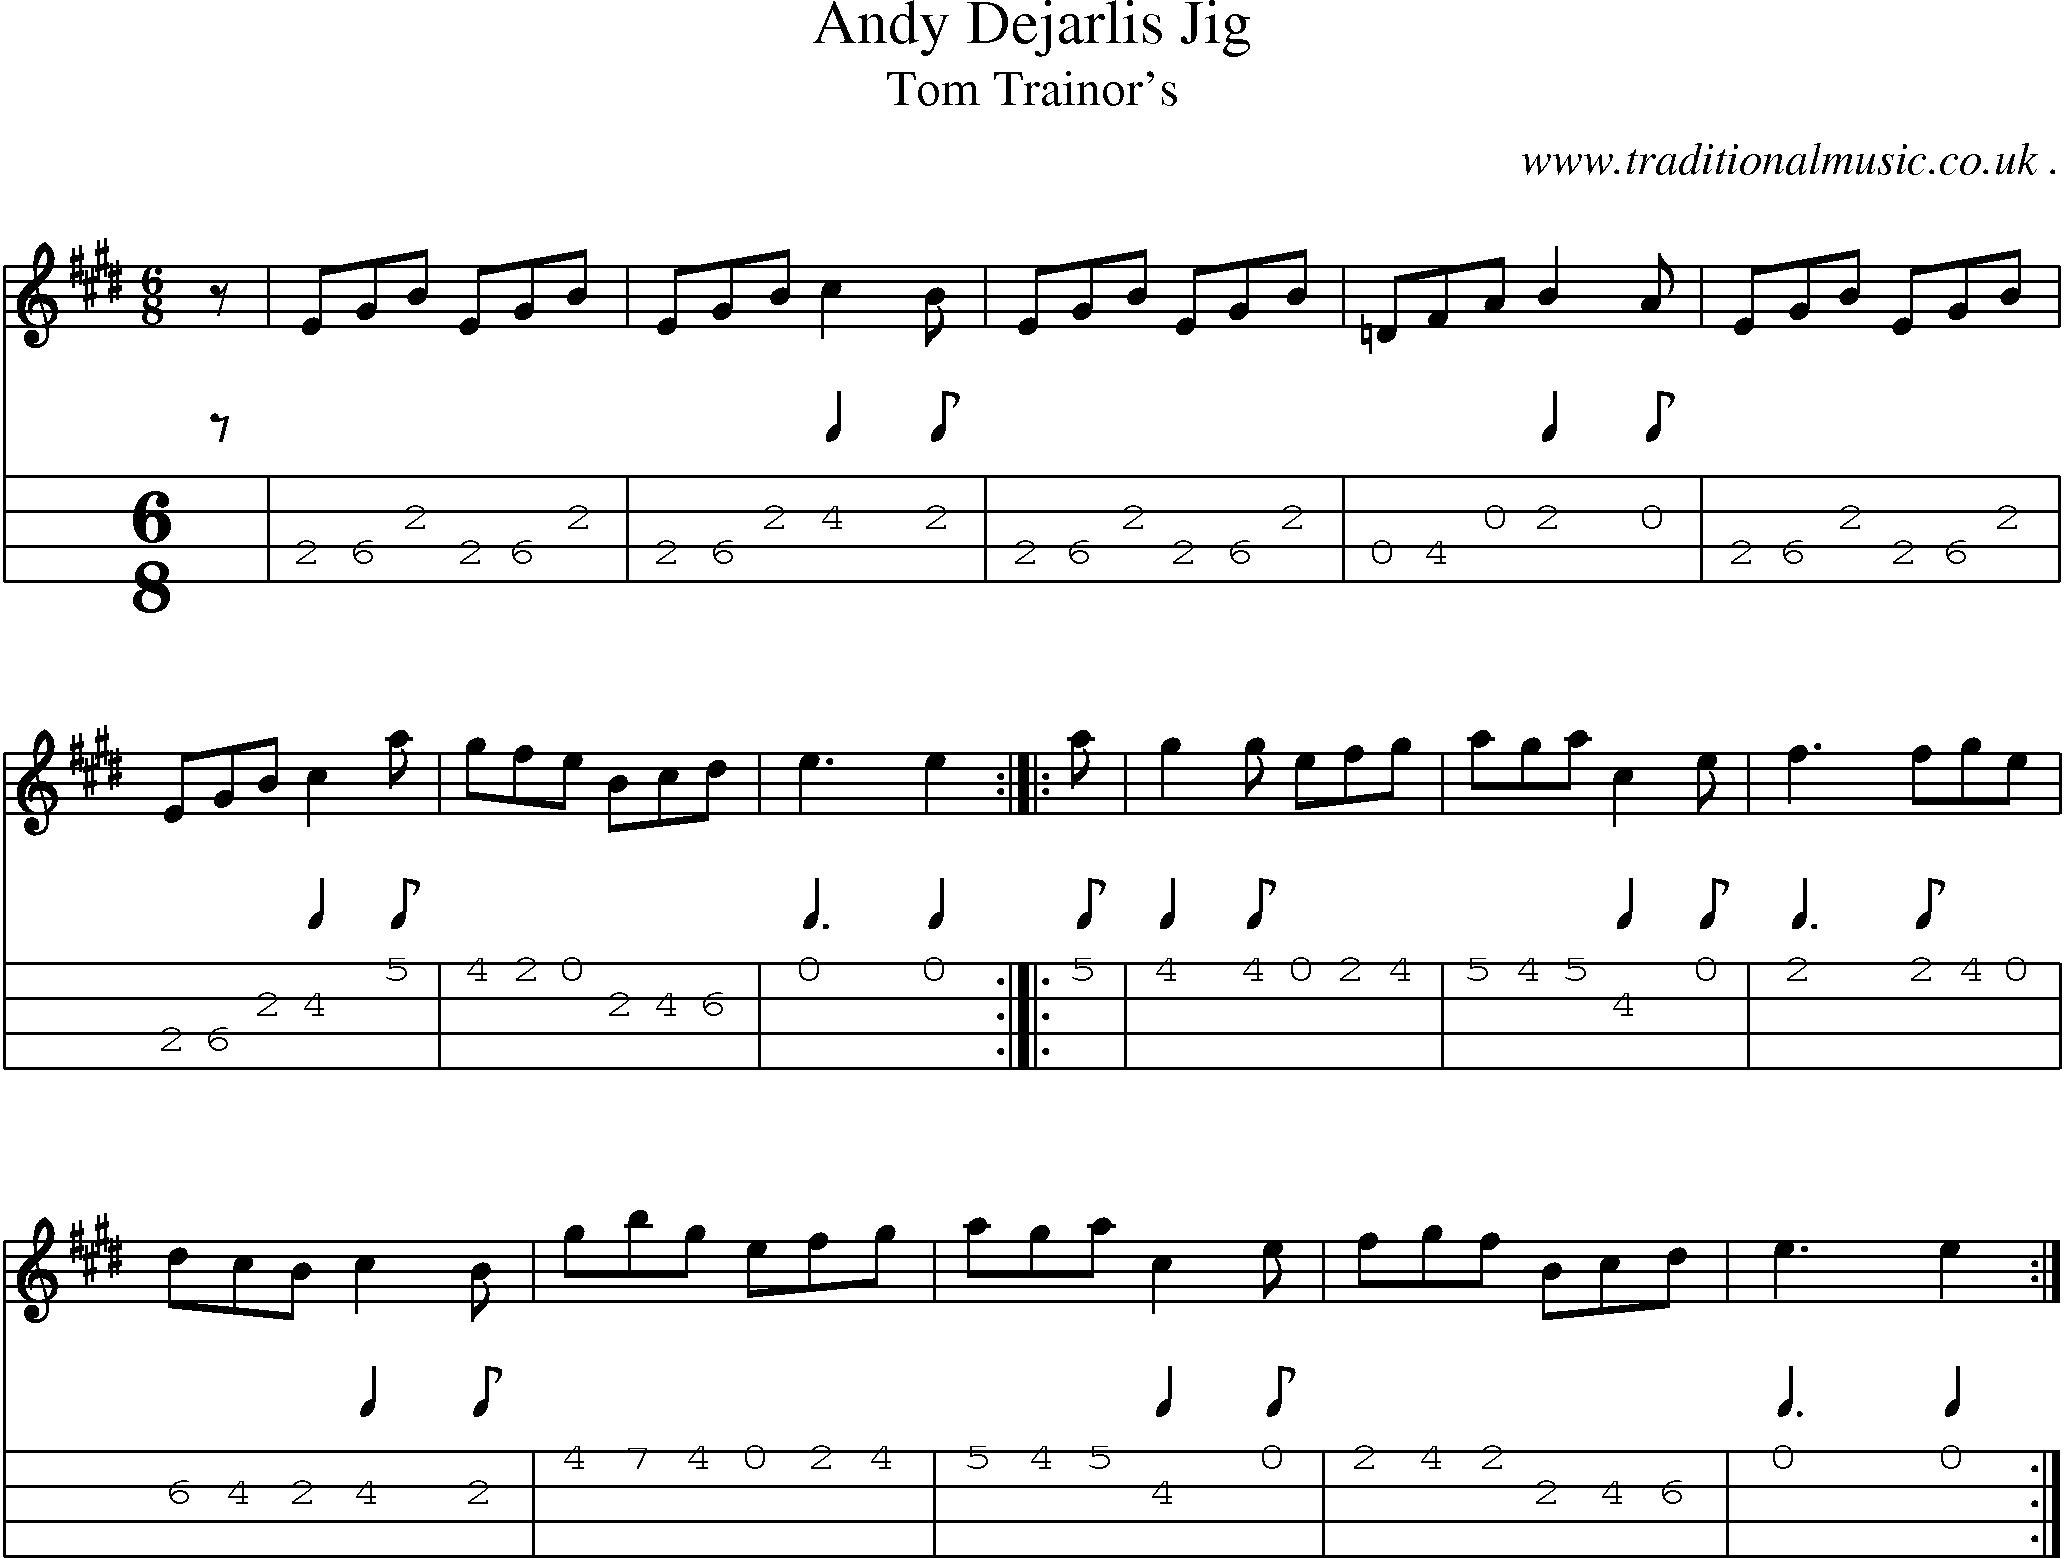 Sheet-music  score, Chords and Mandolin Tabs for Andy Dejarlis Jig